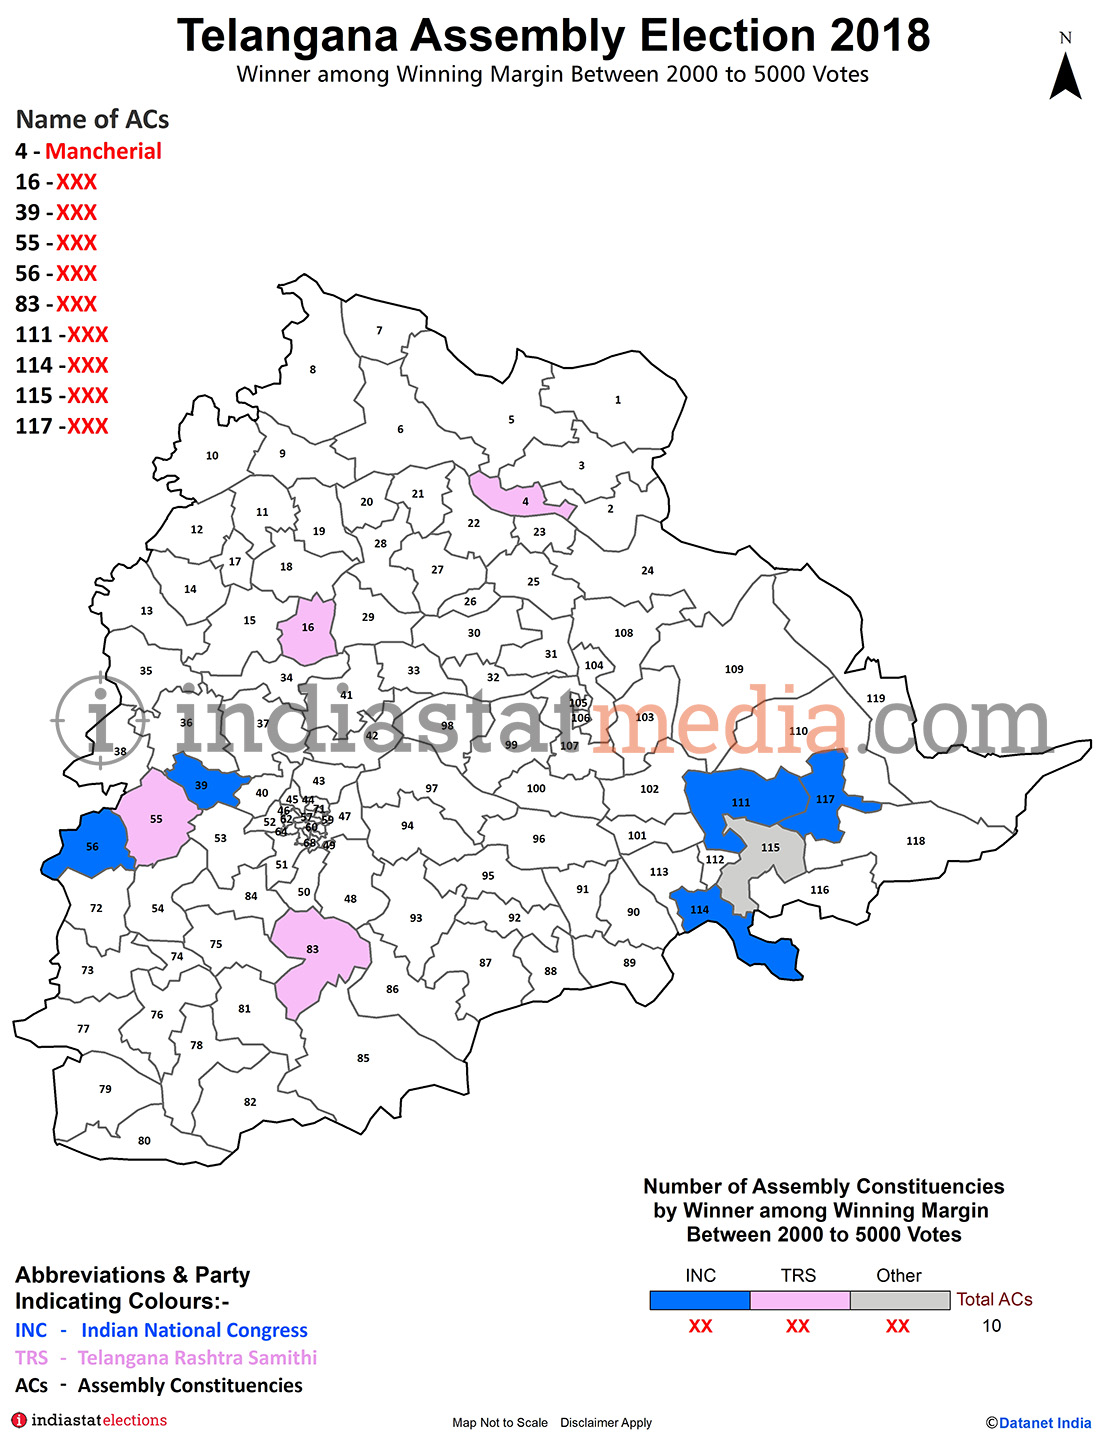 Winner among Winning Margin Between 2000 to 5000 Votes in Telangana (Assembly Election - 2018)